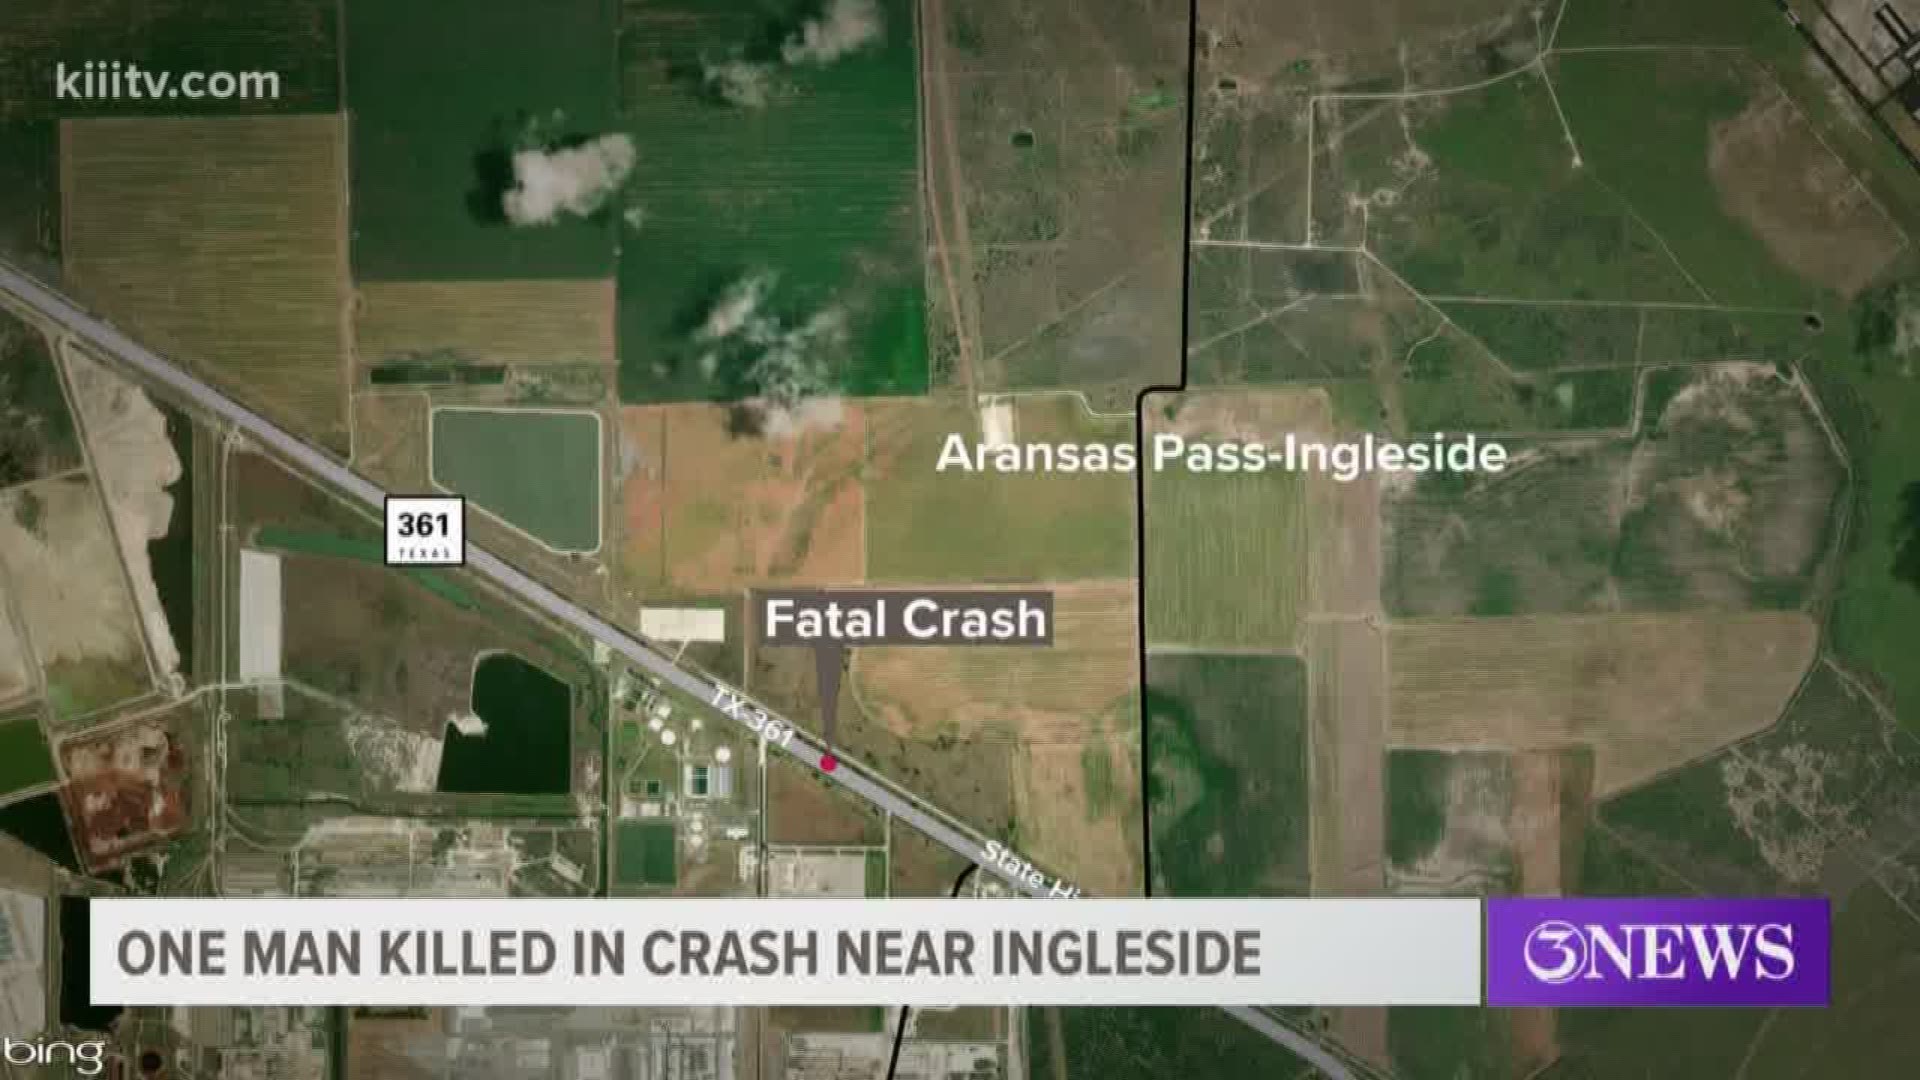 According to DPS, a 40-year-old Alabama man was killed in a crash early Monday morning near Ingleside.